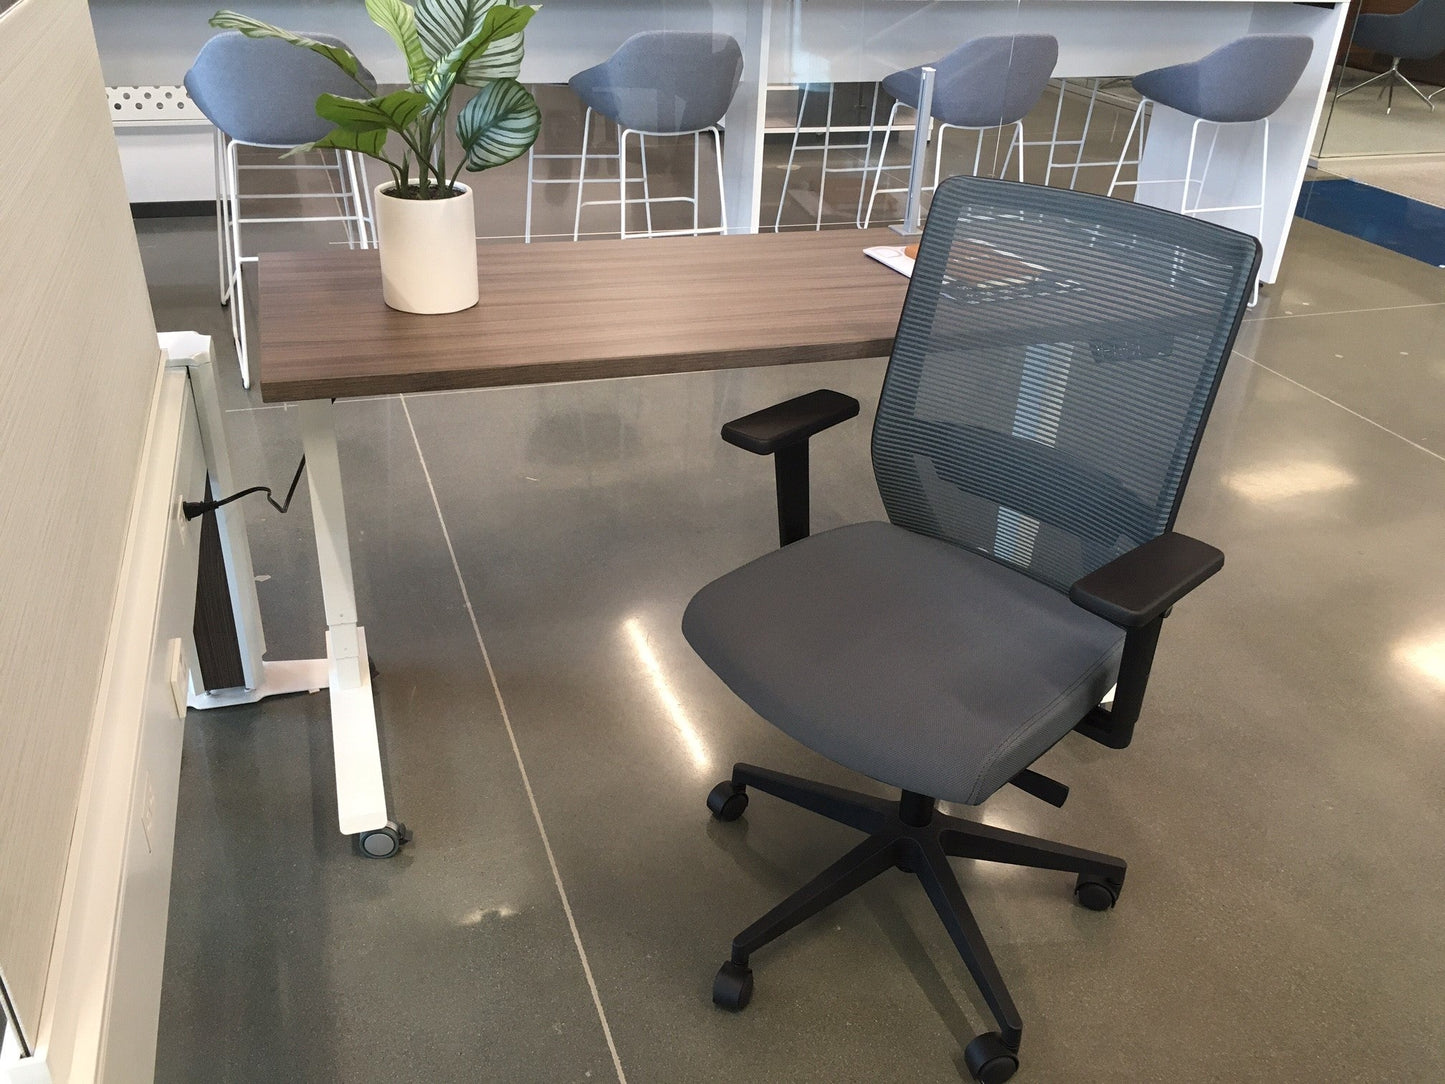 Load image into Gallery viewer, Vektor Task Chair by Friant - Wholesale Office Furniture
